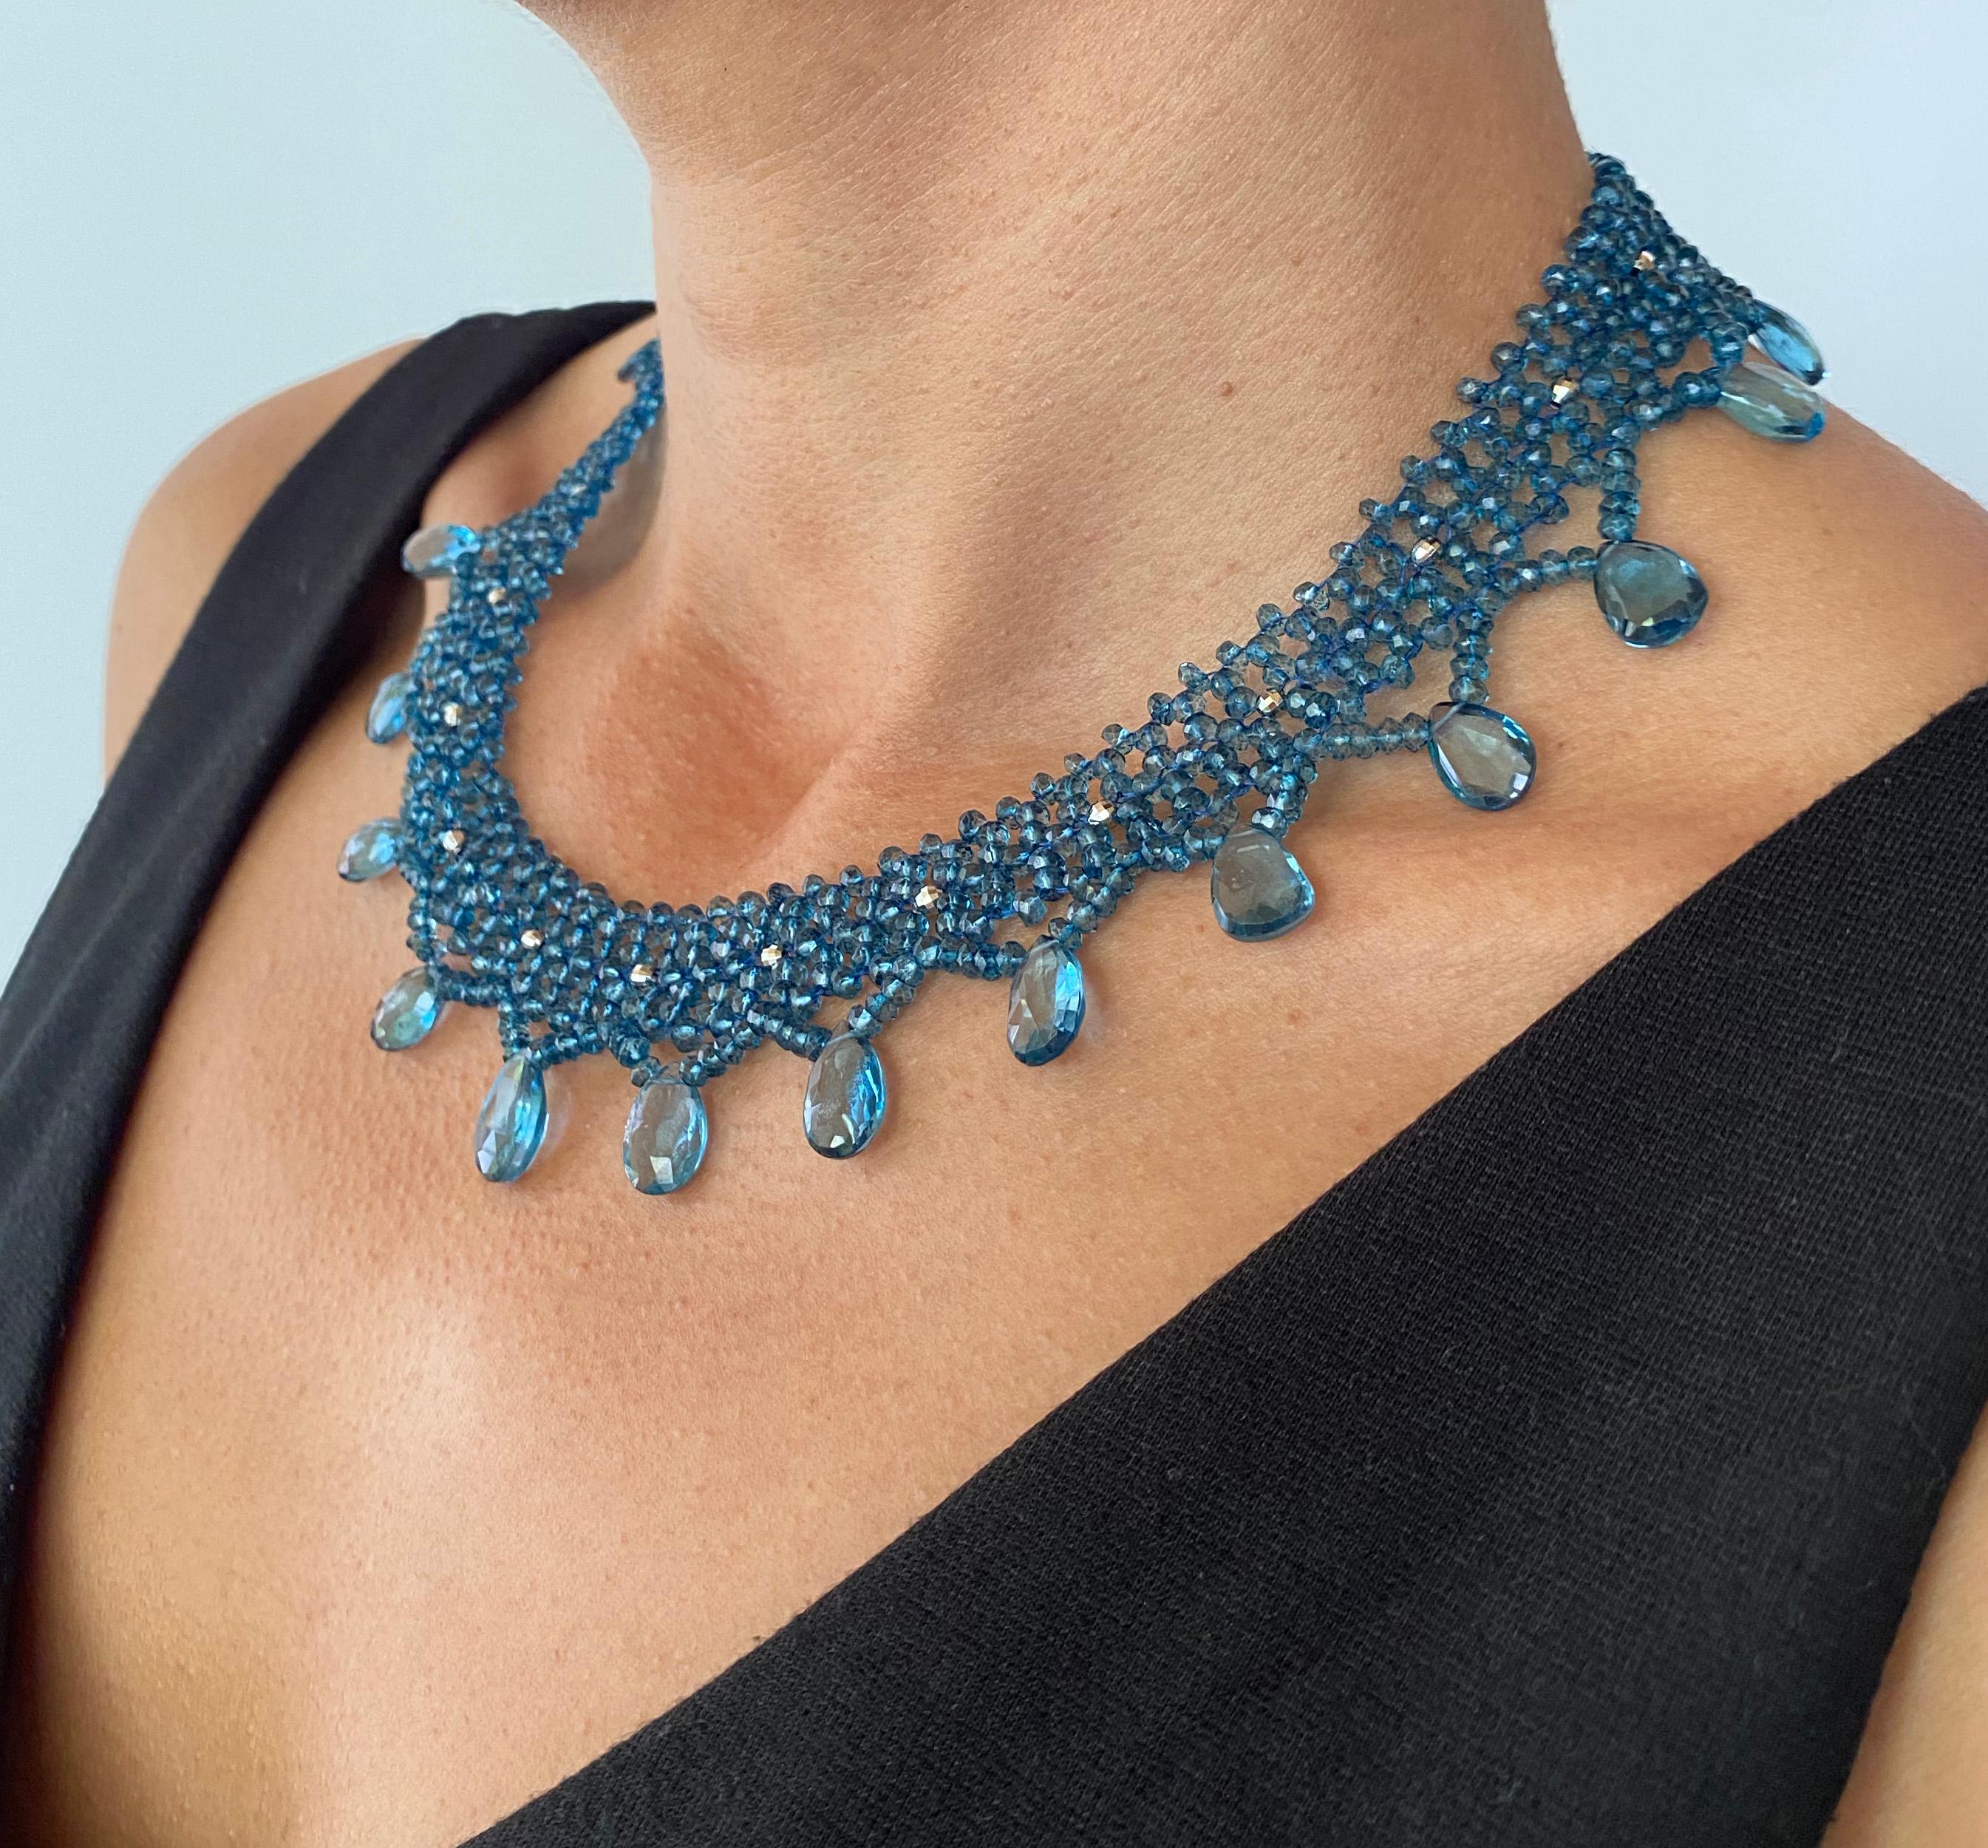 This intricately woven necklace features brilliant London Blue Topaz.beads .  The vibrancy of these beads and briollettes illuminate a perfect blue glow. Faceted Rhodium plated Sterling Silver beads add pops of shine that perfectly compliment the